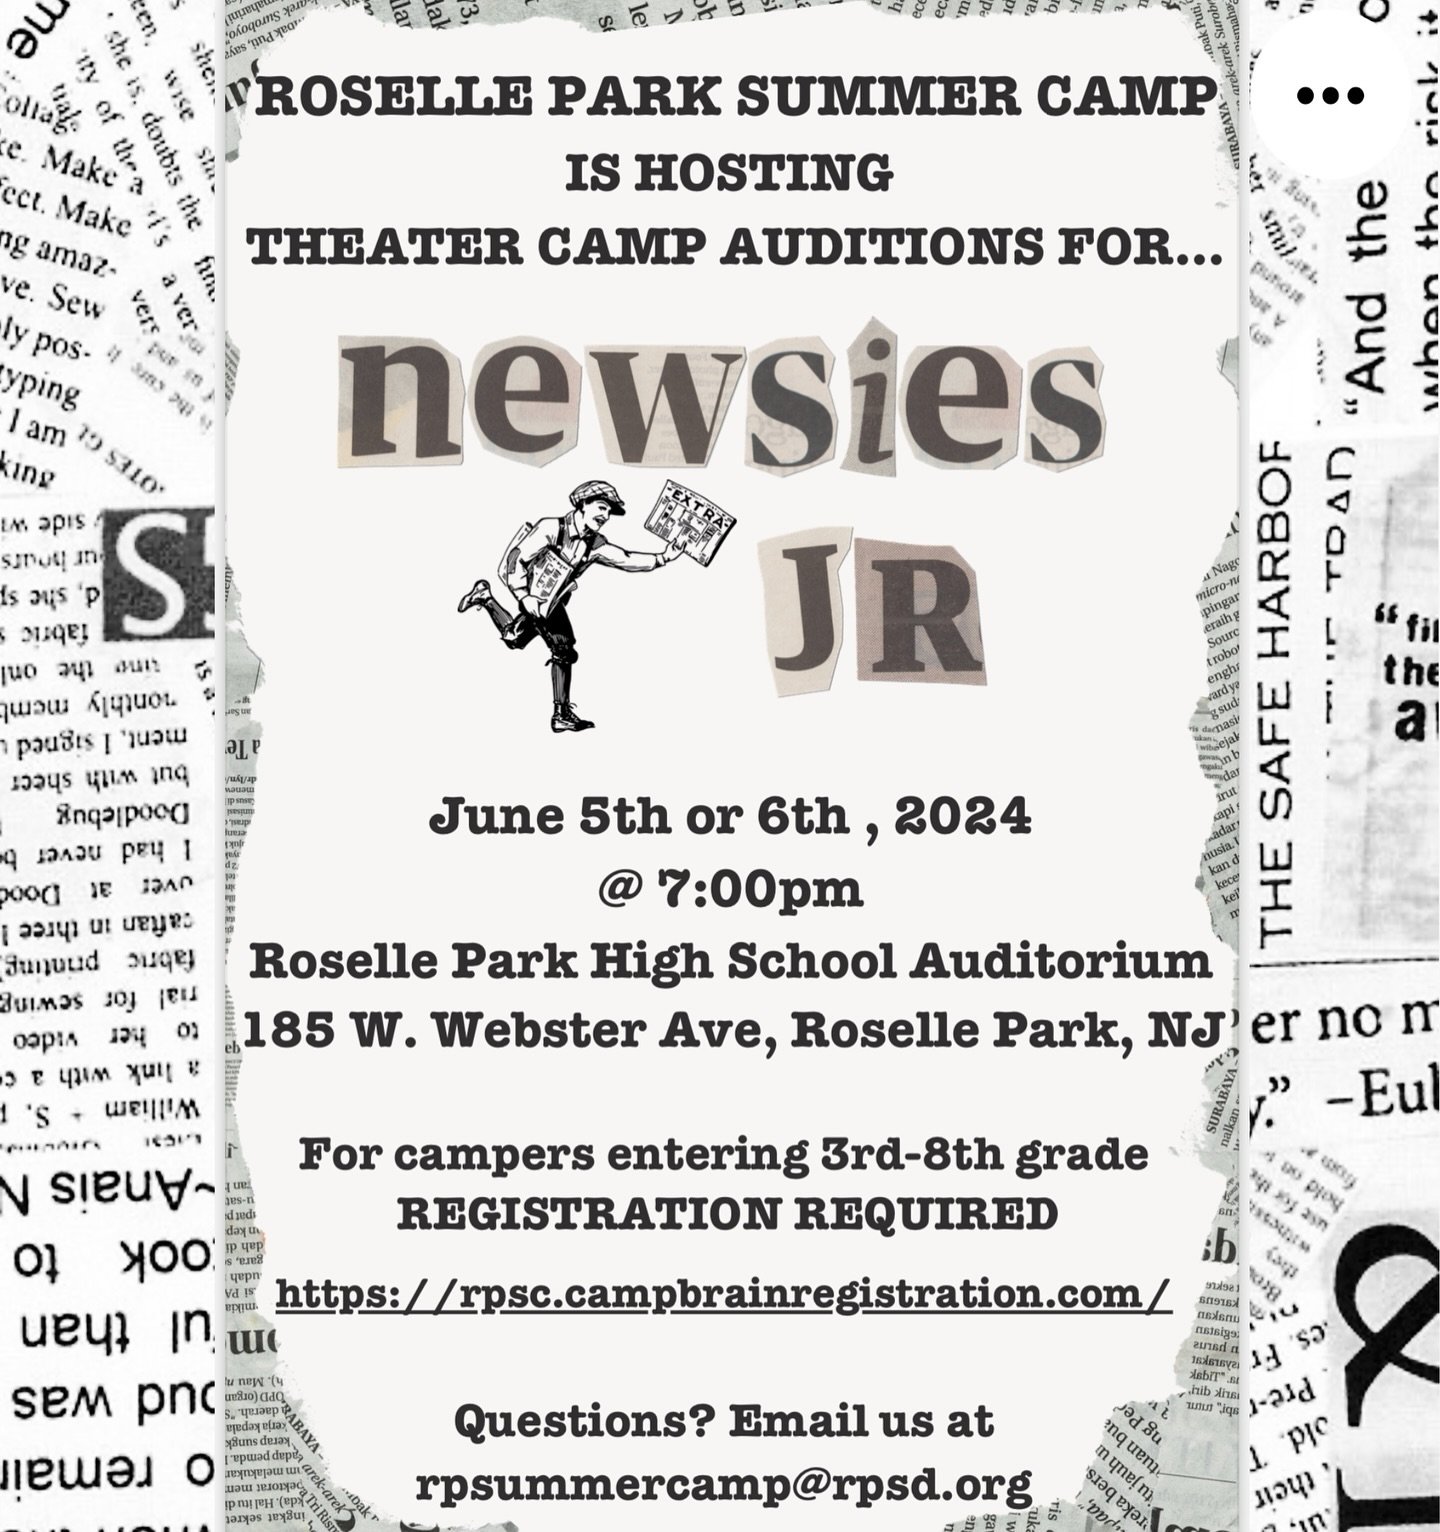 EXTRA EXTRA READ ALL ABOUT IT! The Roselle Park Summer Camp&rsquo;s Theater Camp is holding auditions for this Summer&rsquo;s production of &ldquo;Newsies Jr.&rdquo; on June 5&amp;6! See flyer for details!

#RosellePark #RoselleParkHighSchool #Commun